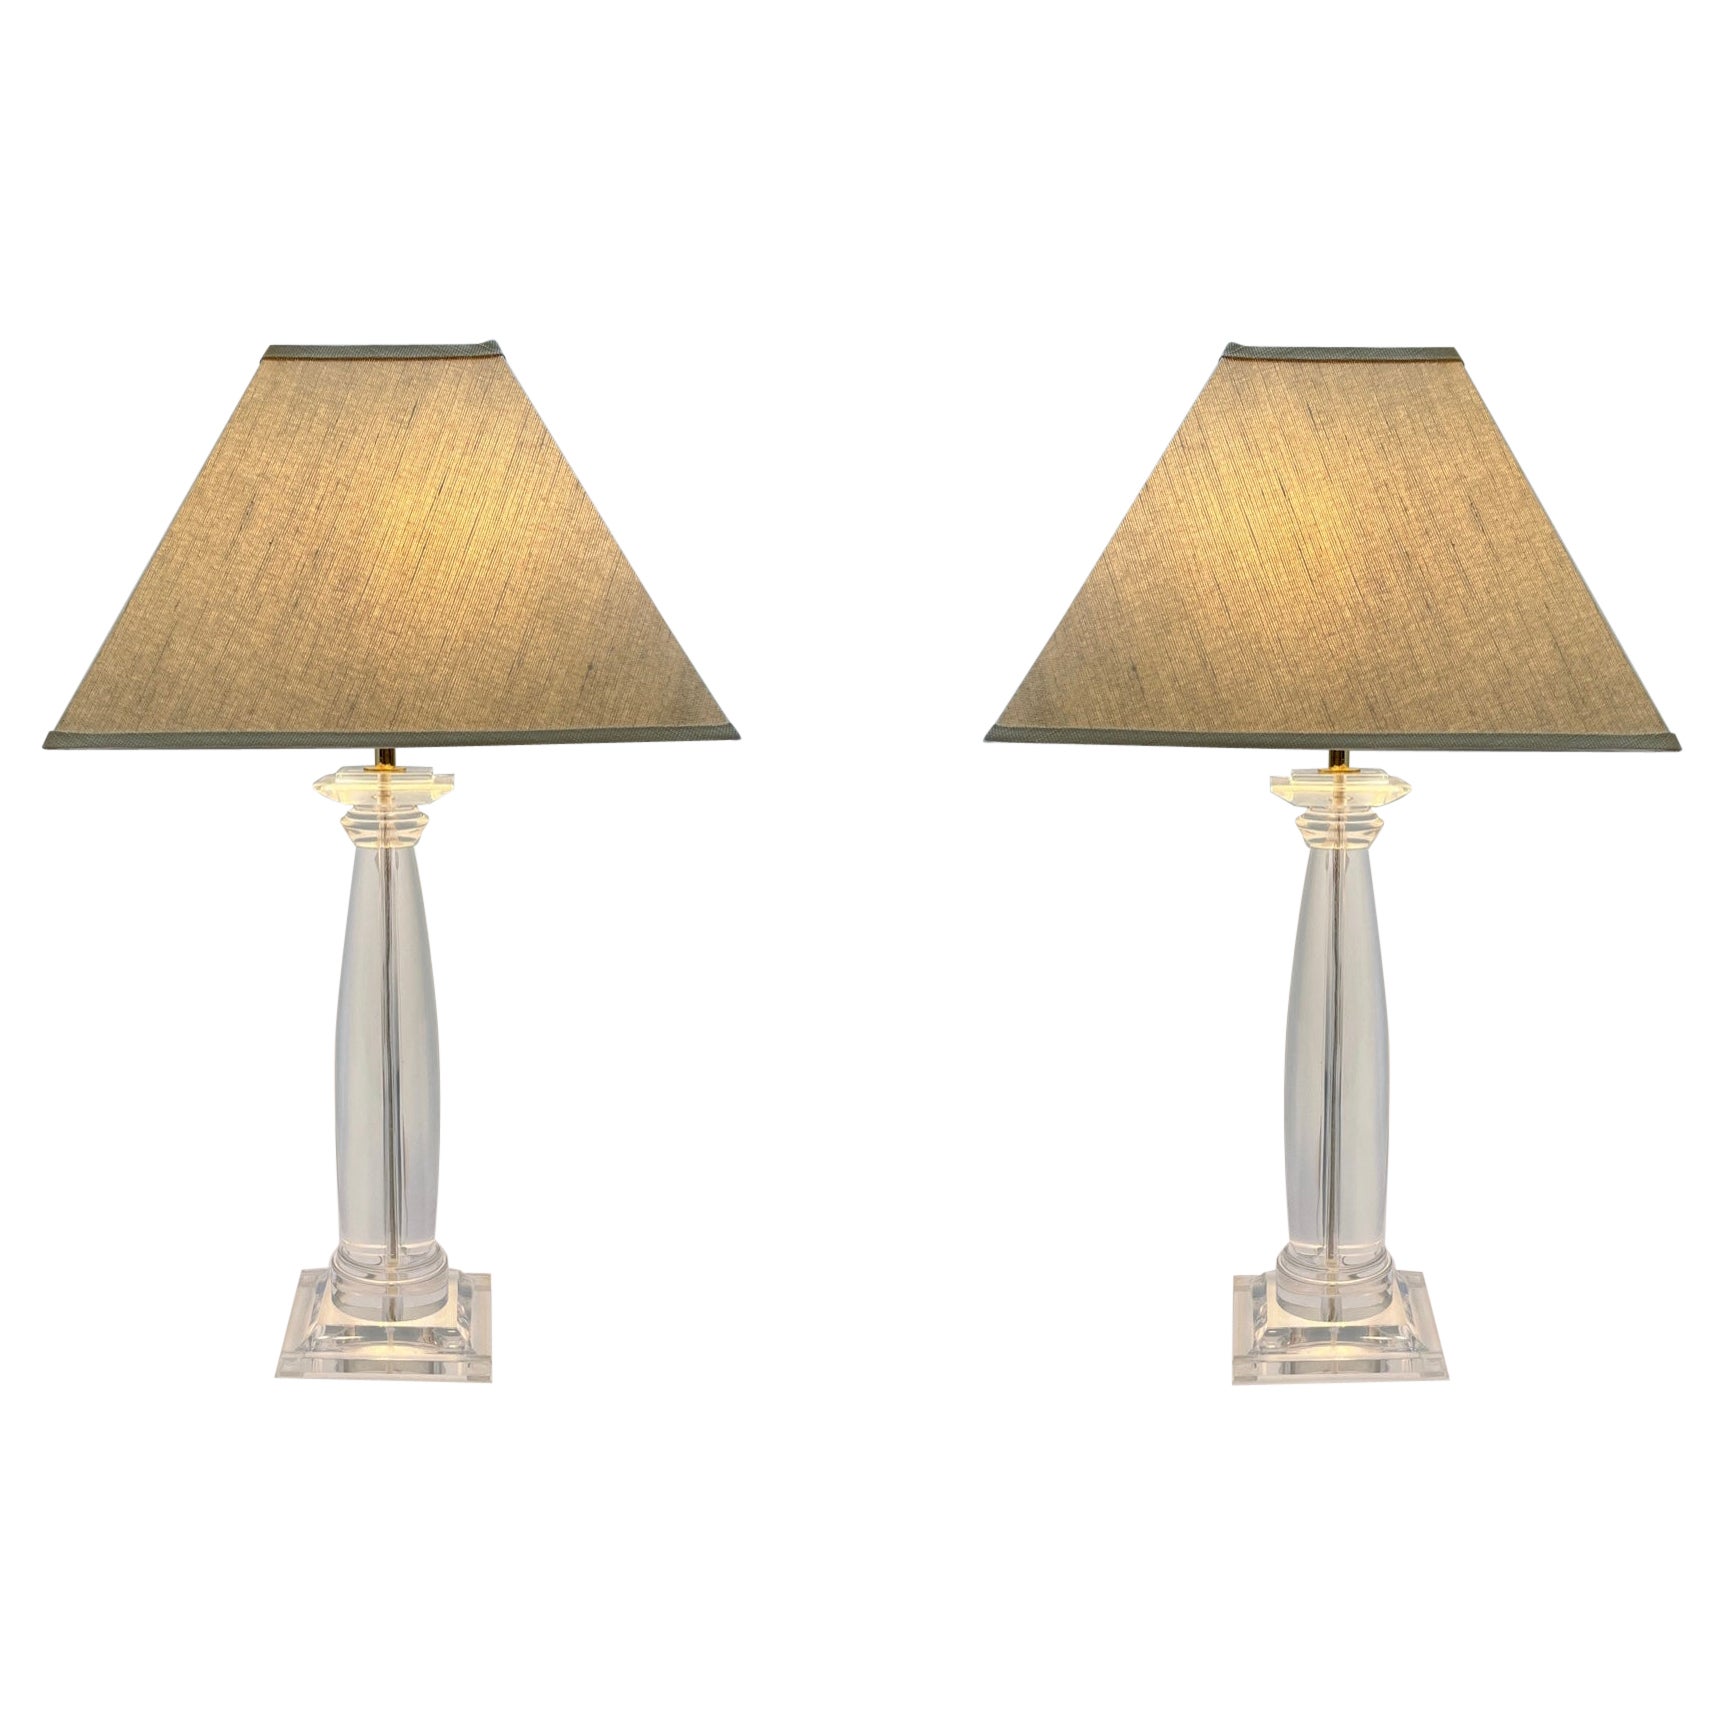 Pair of Lucite and Brass Greek Column Table Lamps by Karl Springer